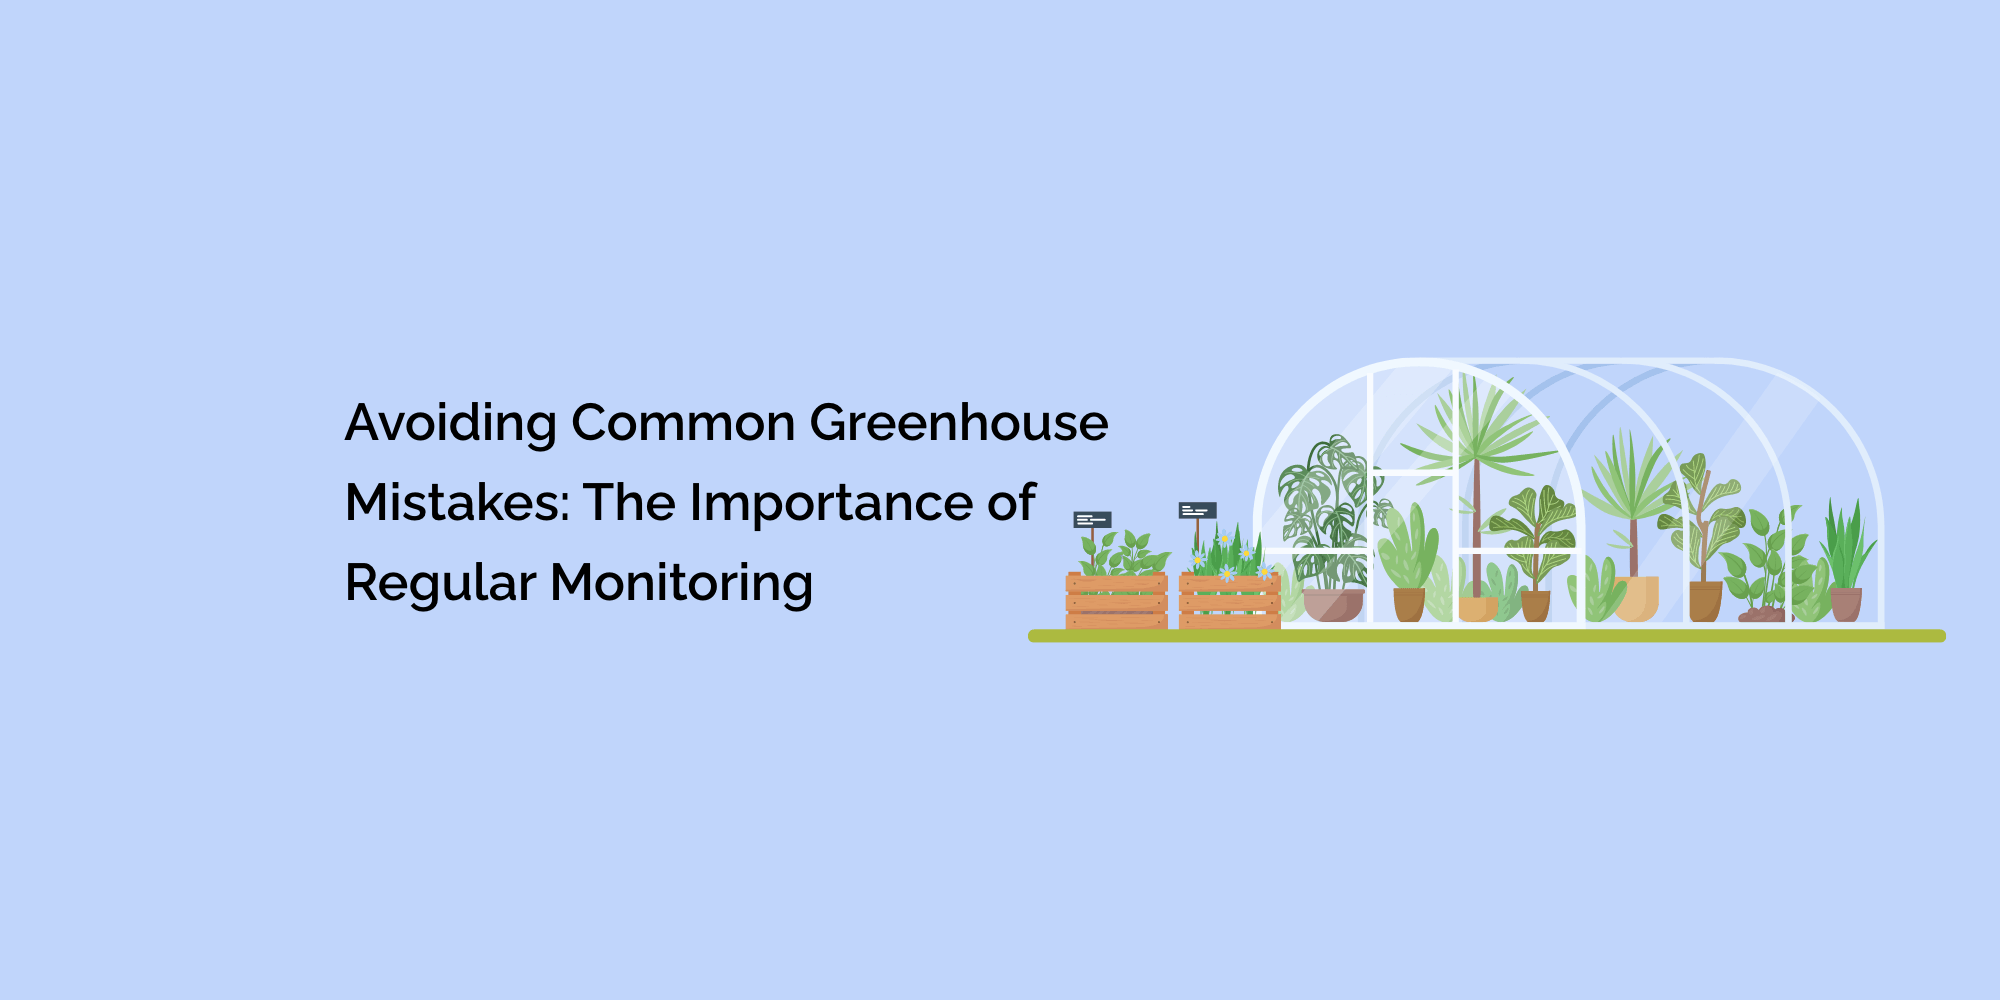 Avoiding Common Greenhouse Mistakes: The Importance of Regular Monitoring